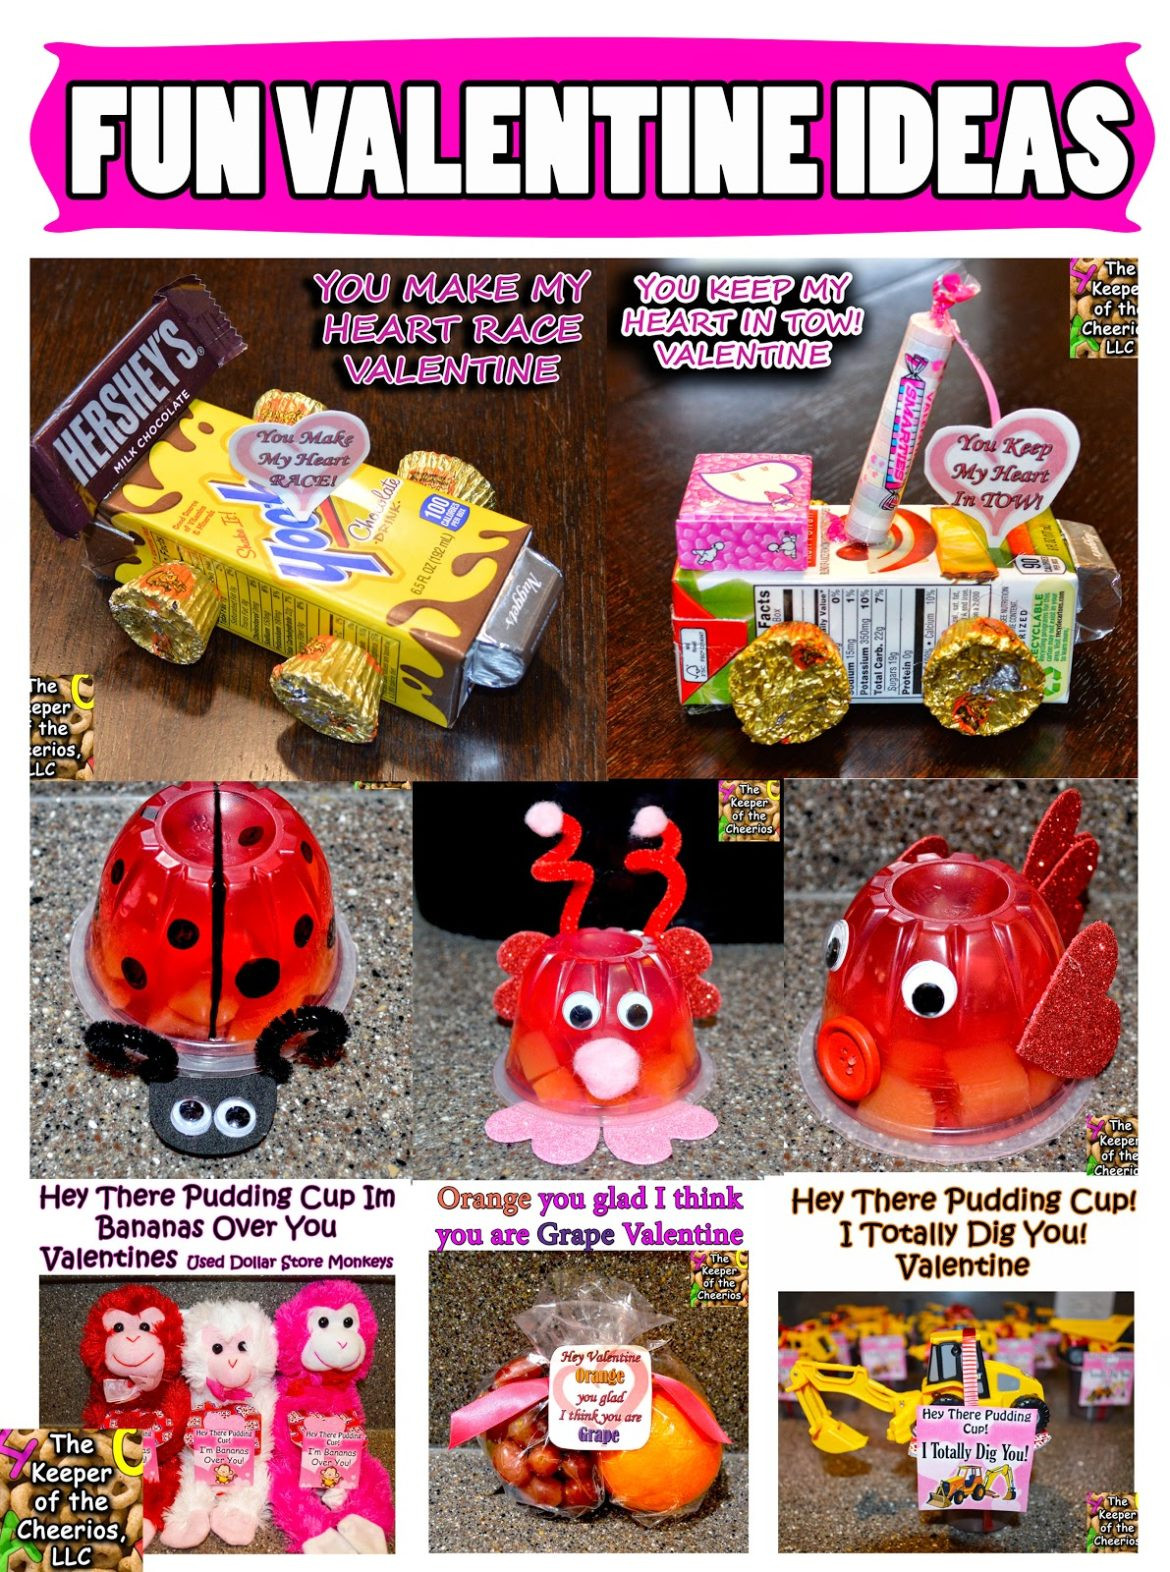 Valentine'S Day Treats &amp; Diy Gift Ideas
 VALENTINE IDEAS The Keeper of the Cheerios